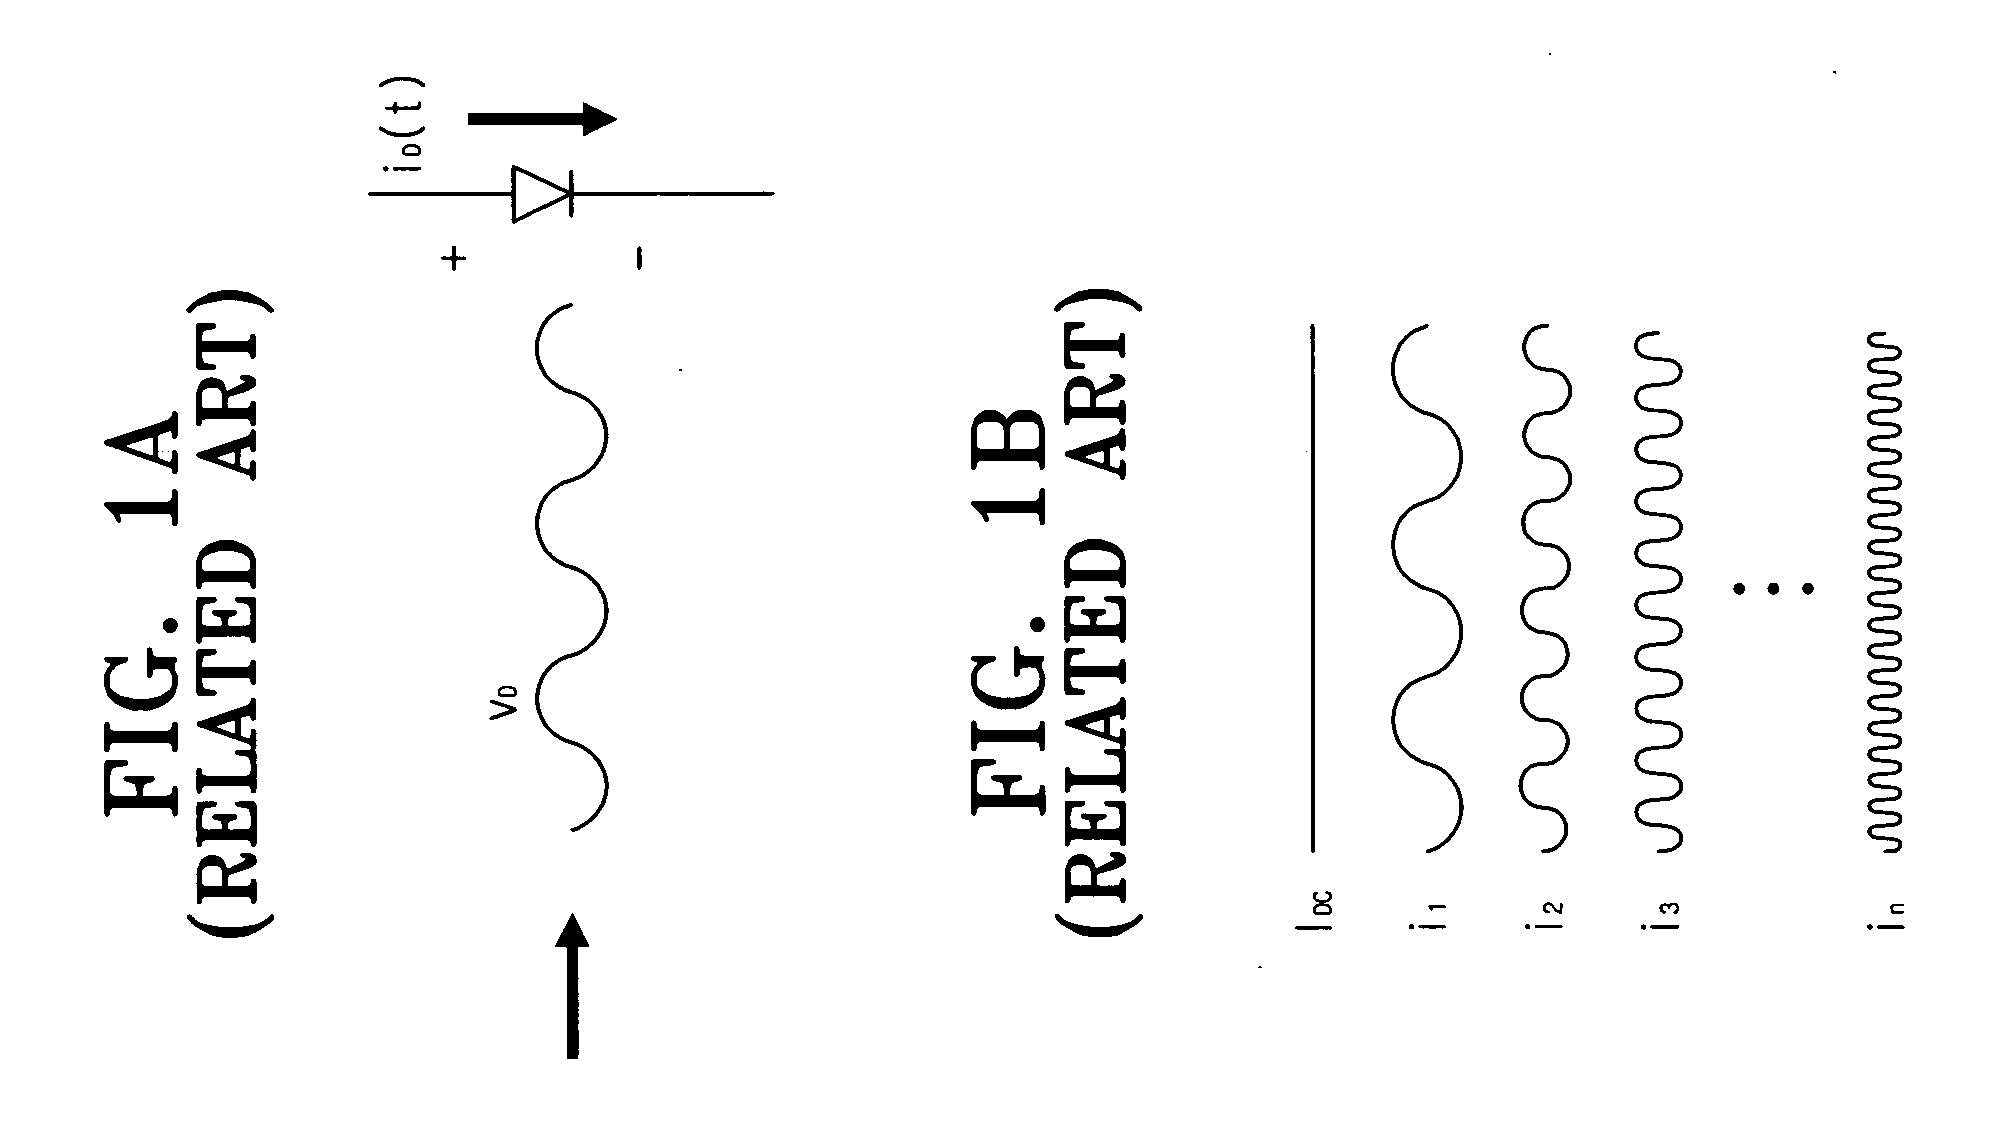 Diode circuit having passive element property, impedance modulator including the diode circuit, and DC source including the diode circuit